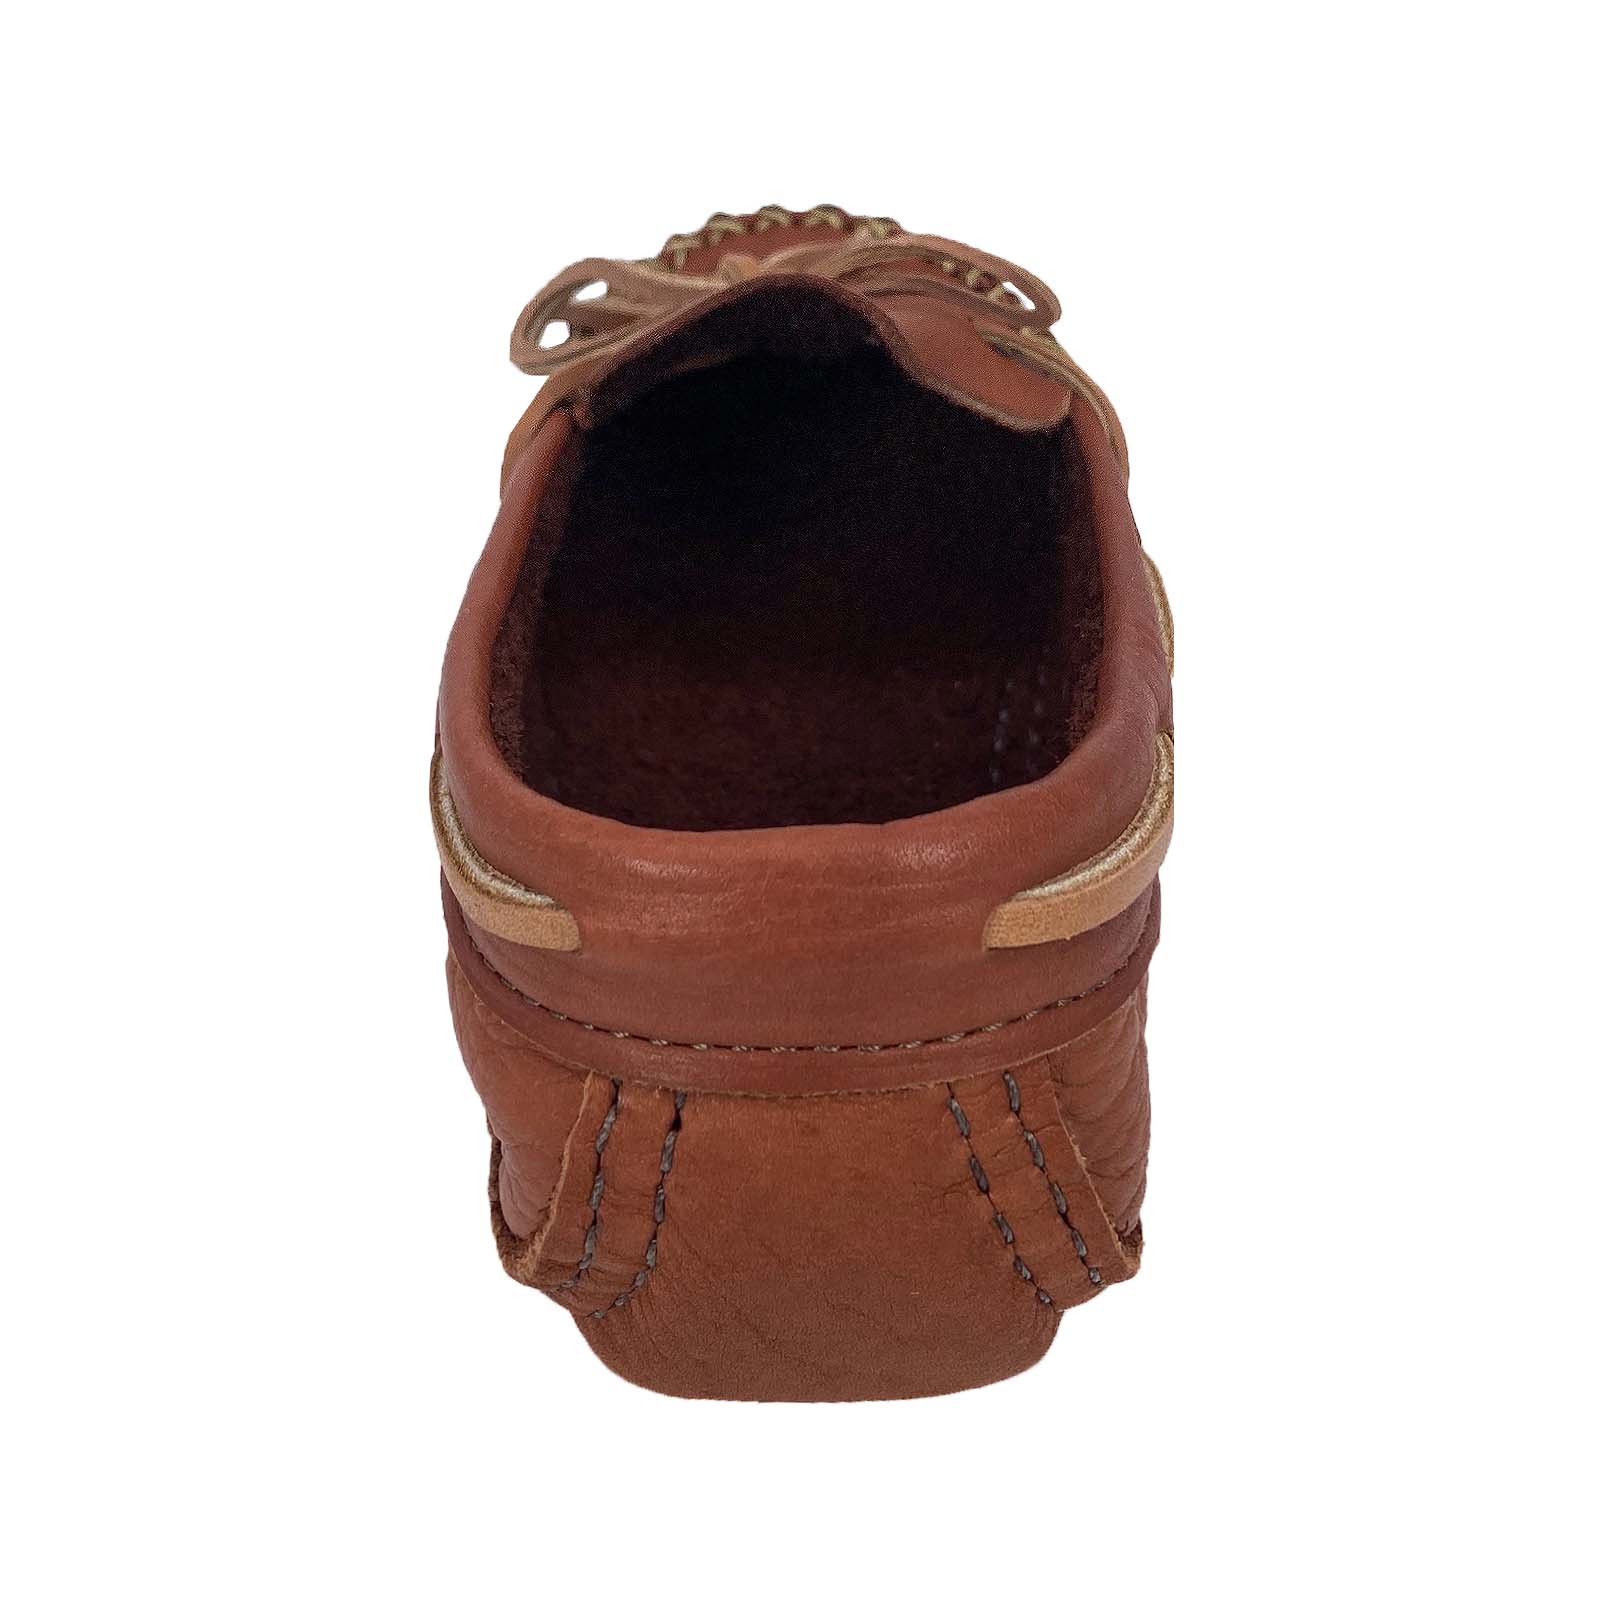 Women's Wide Bison Leather Moccasins (Final Clearance - Size 8 & 9 ONLY)